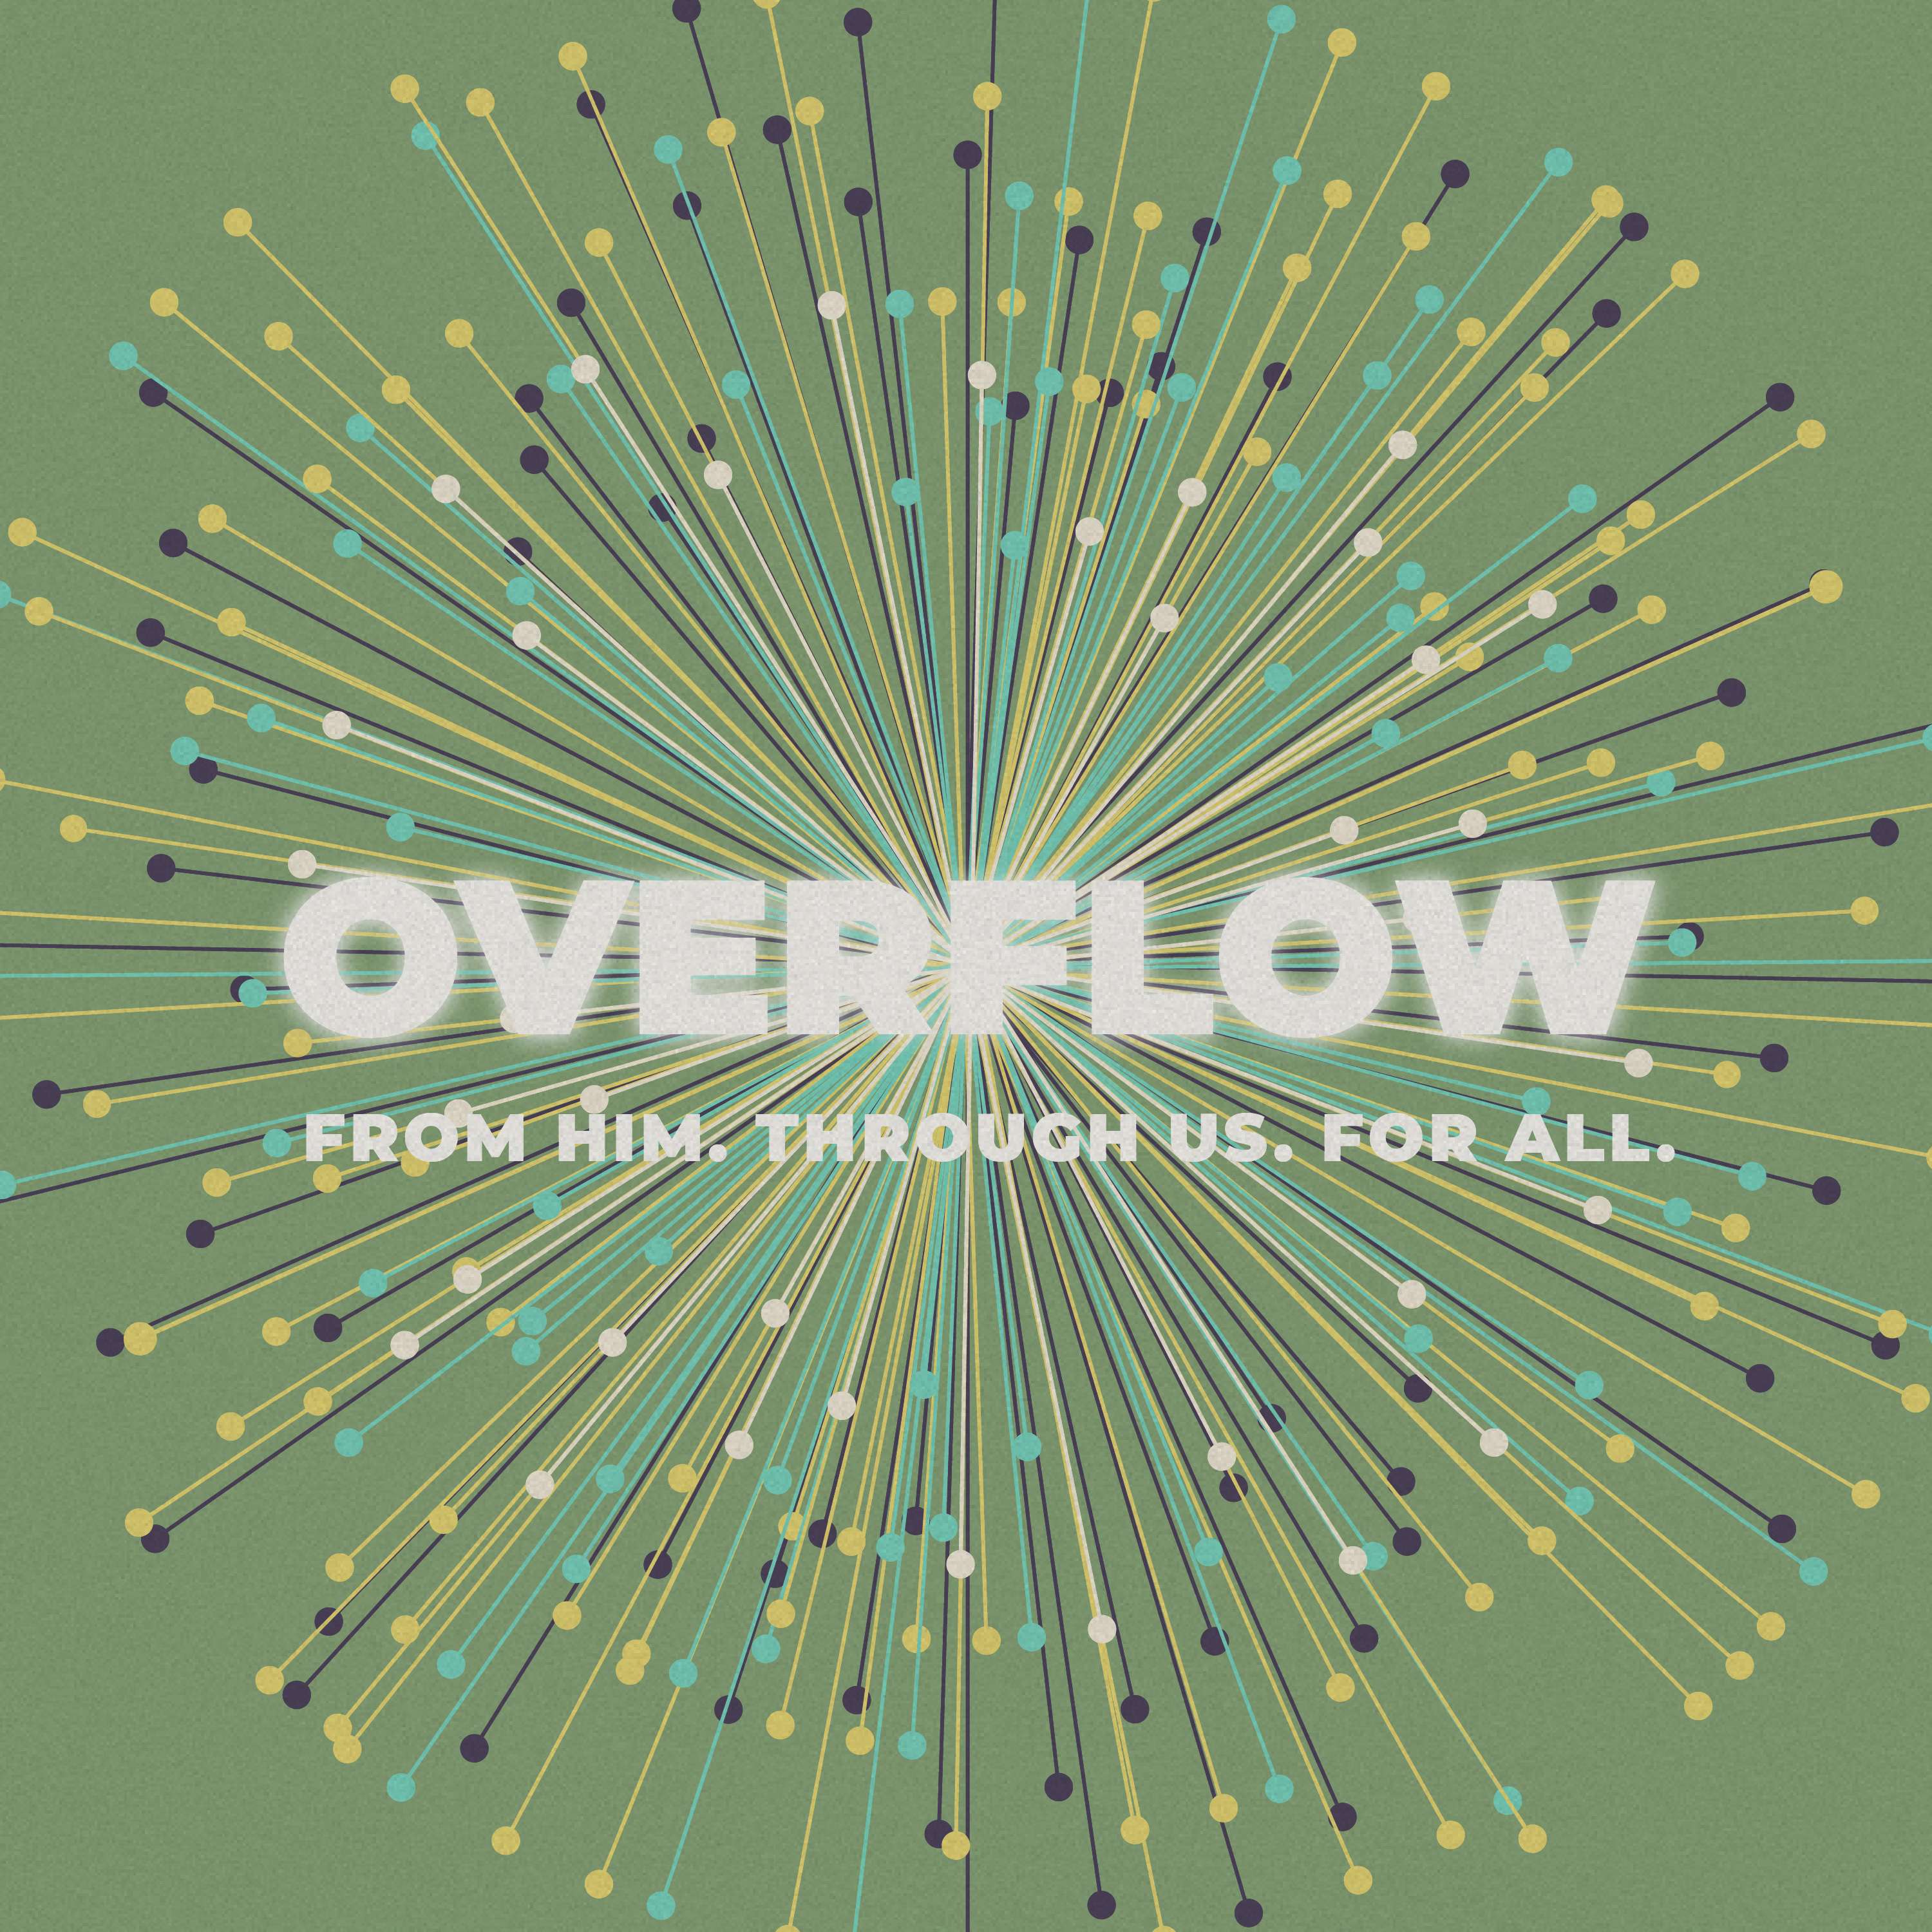 Overflow: From Him, Through Us, For All: Giving and Ministry - Part 4 - Woodside Bible Church